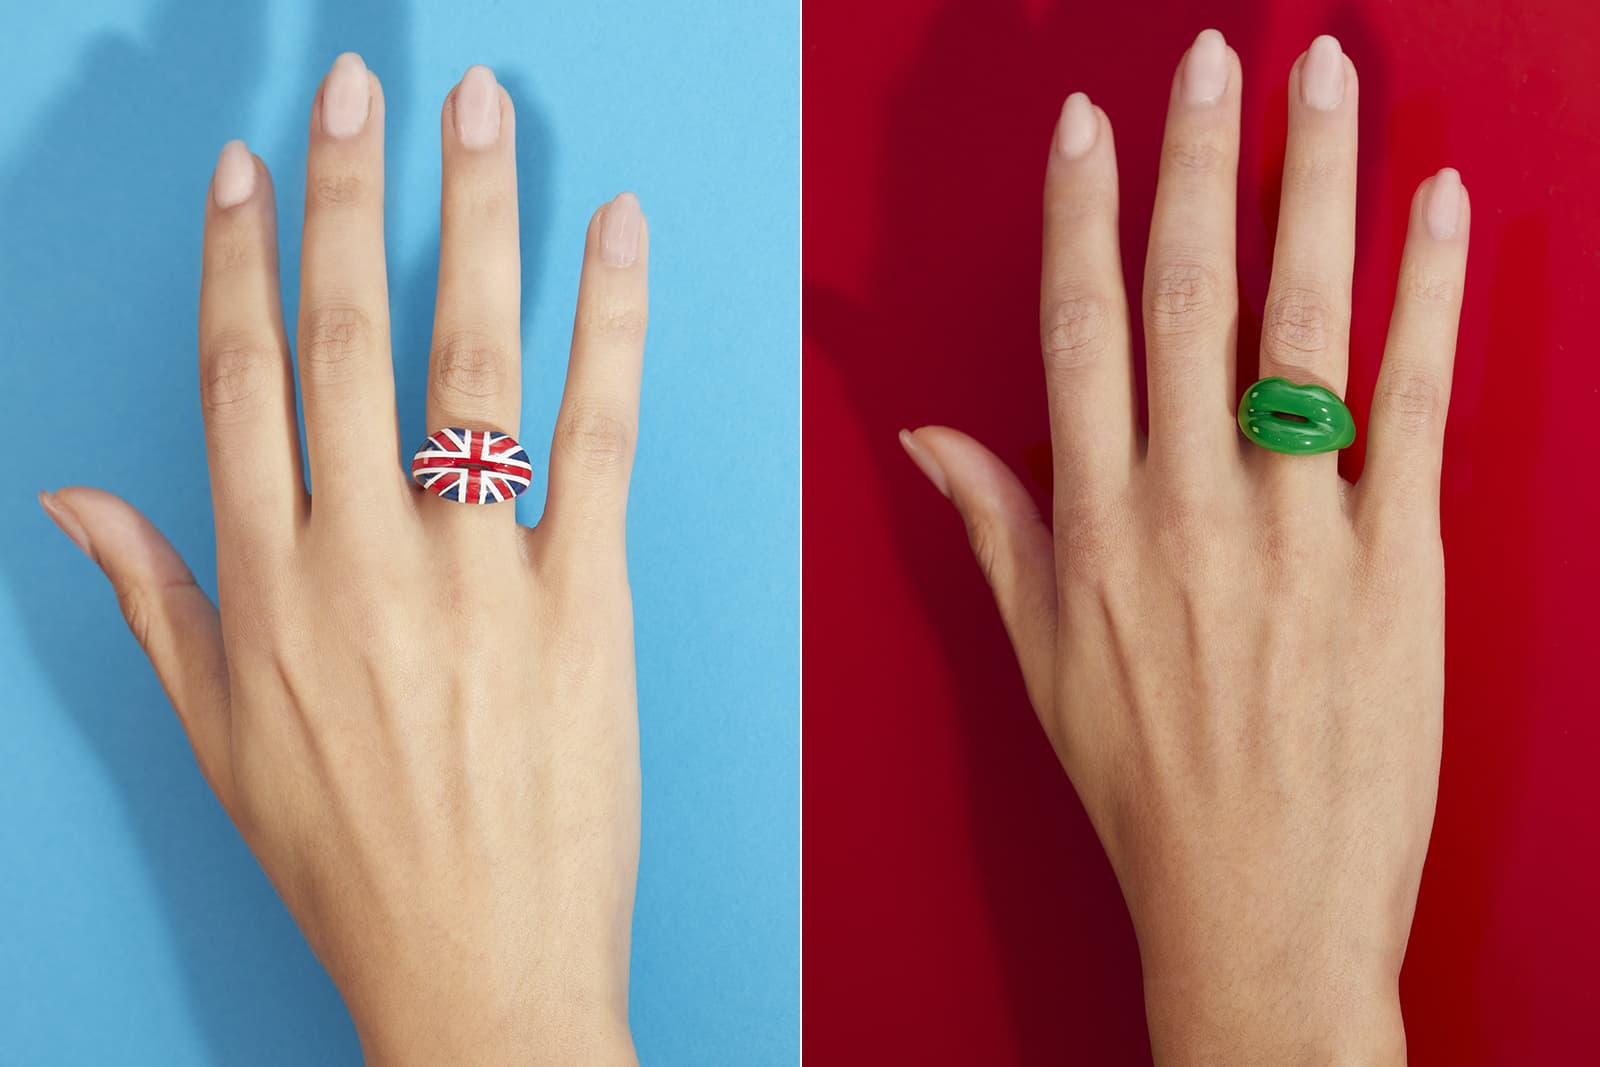 Model wearing the Union Jack and Green Hotlips rings created in hand painted enamel and 100% recycled sterling silver by Solange Azagury-Partridge